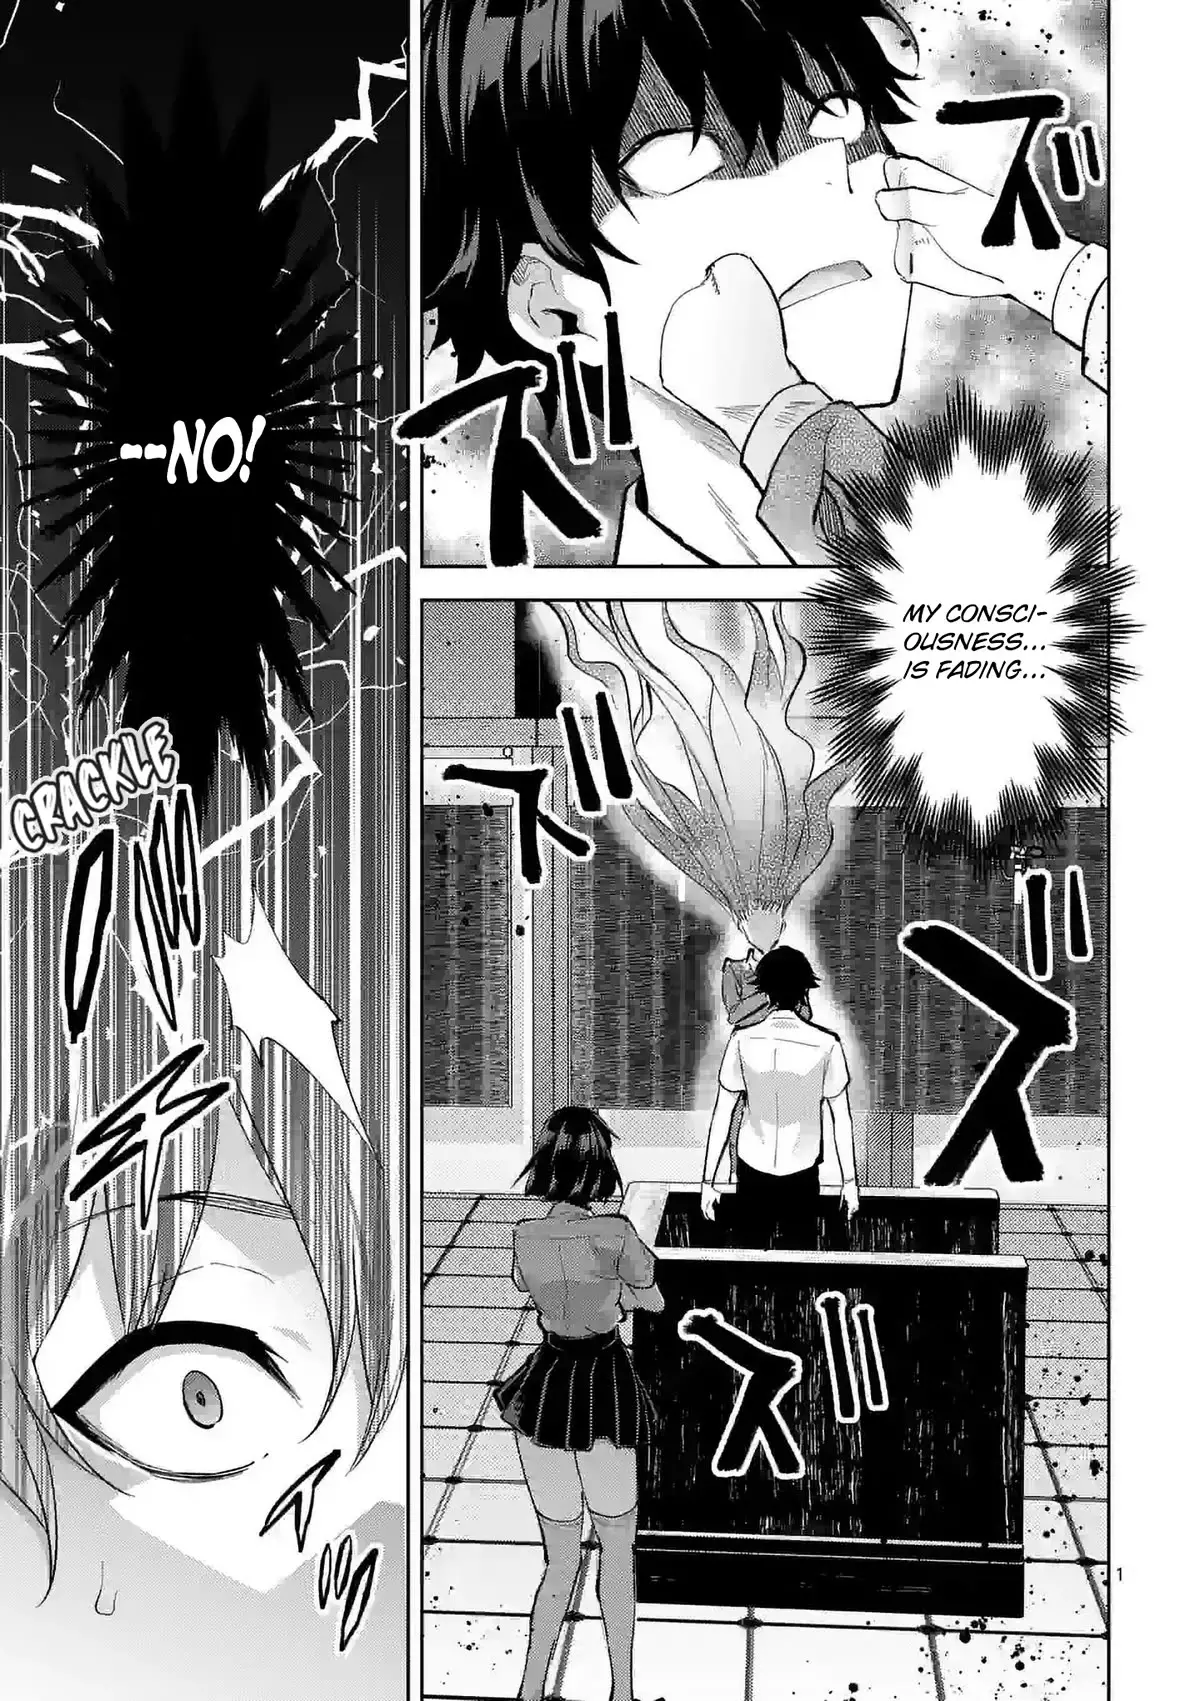 Climax Exorcism With A Single Touch! - 37 page 1-ddd9184a